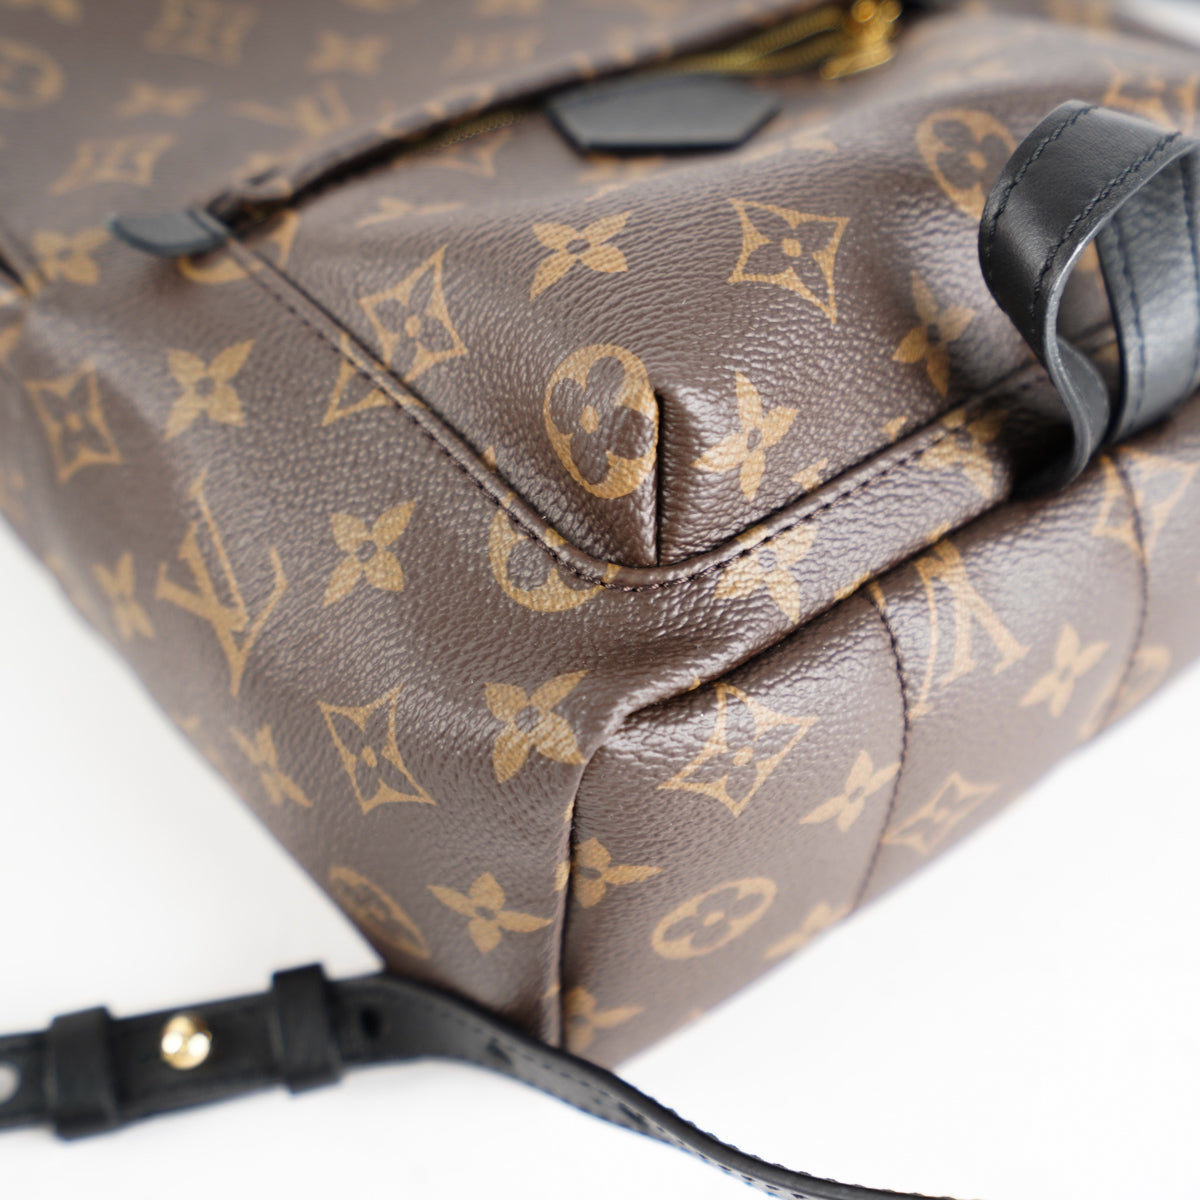 Louis Vuitton Palm Springs Mm Brown Monogram Canvas Backpack - MyDesignerly